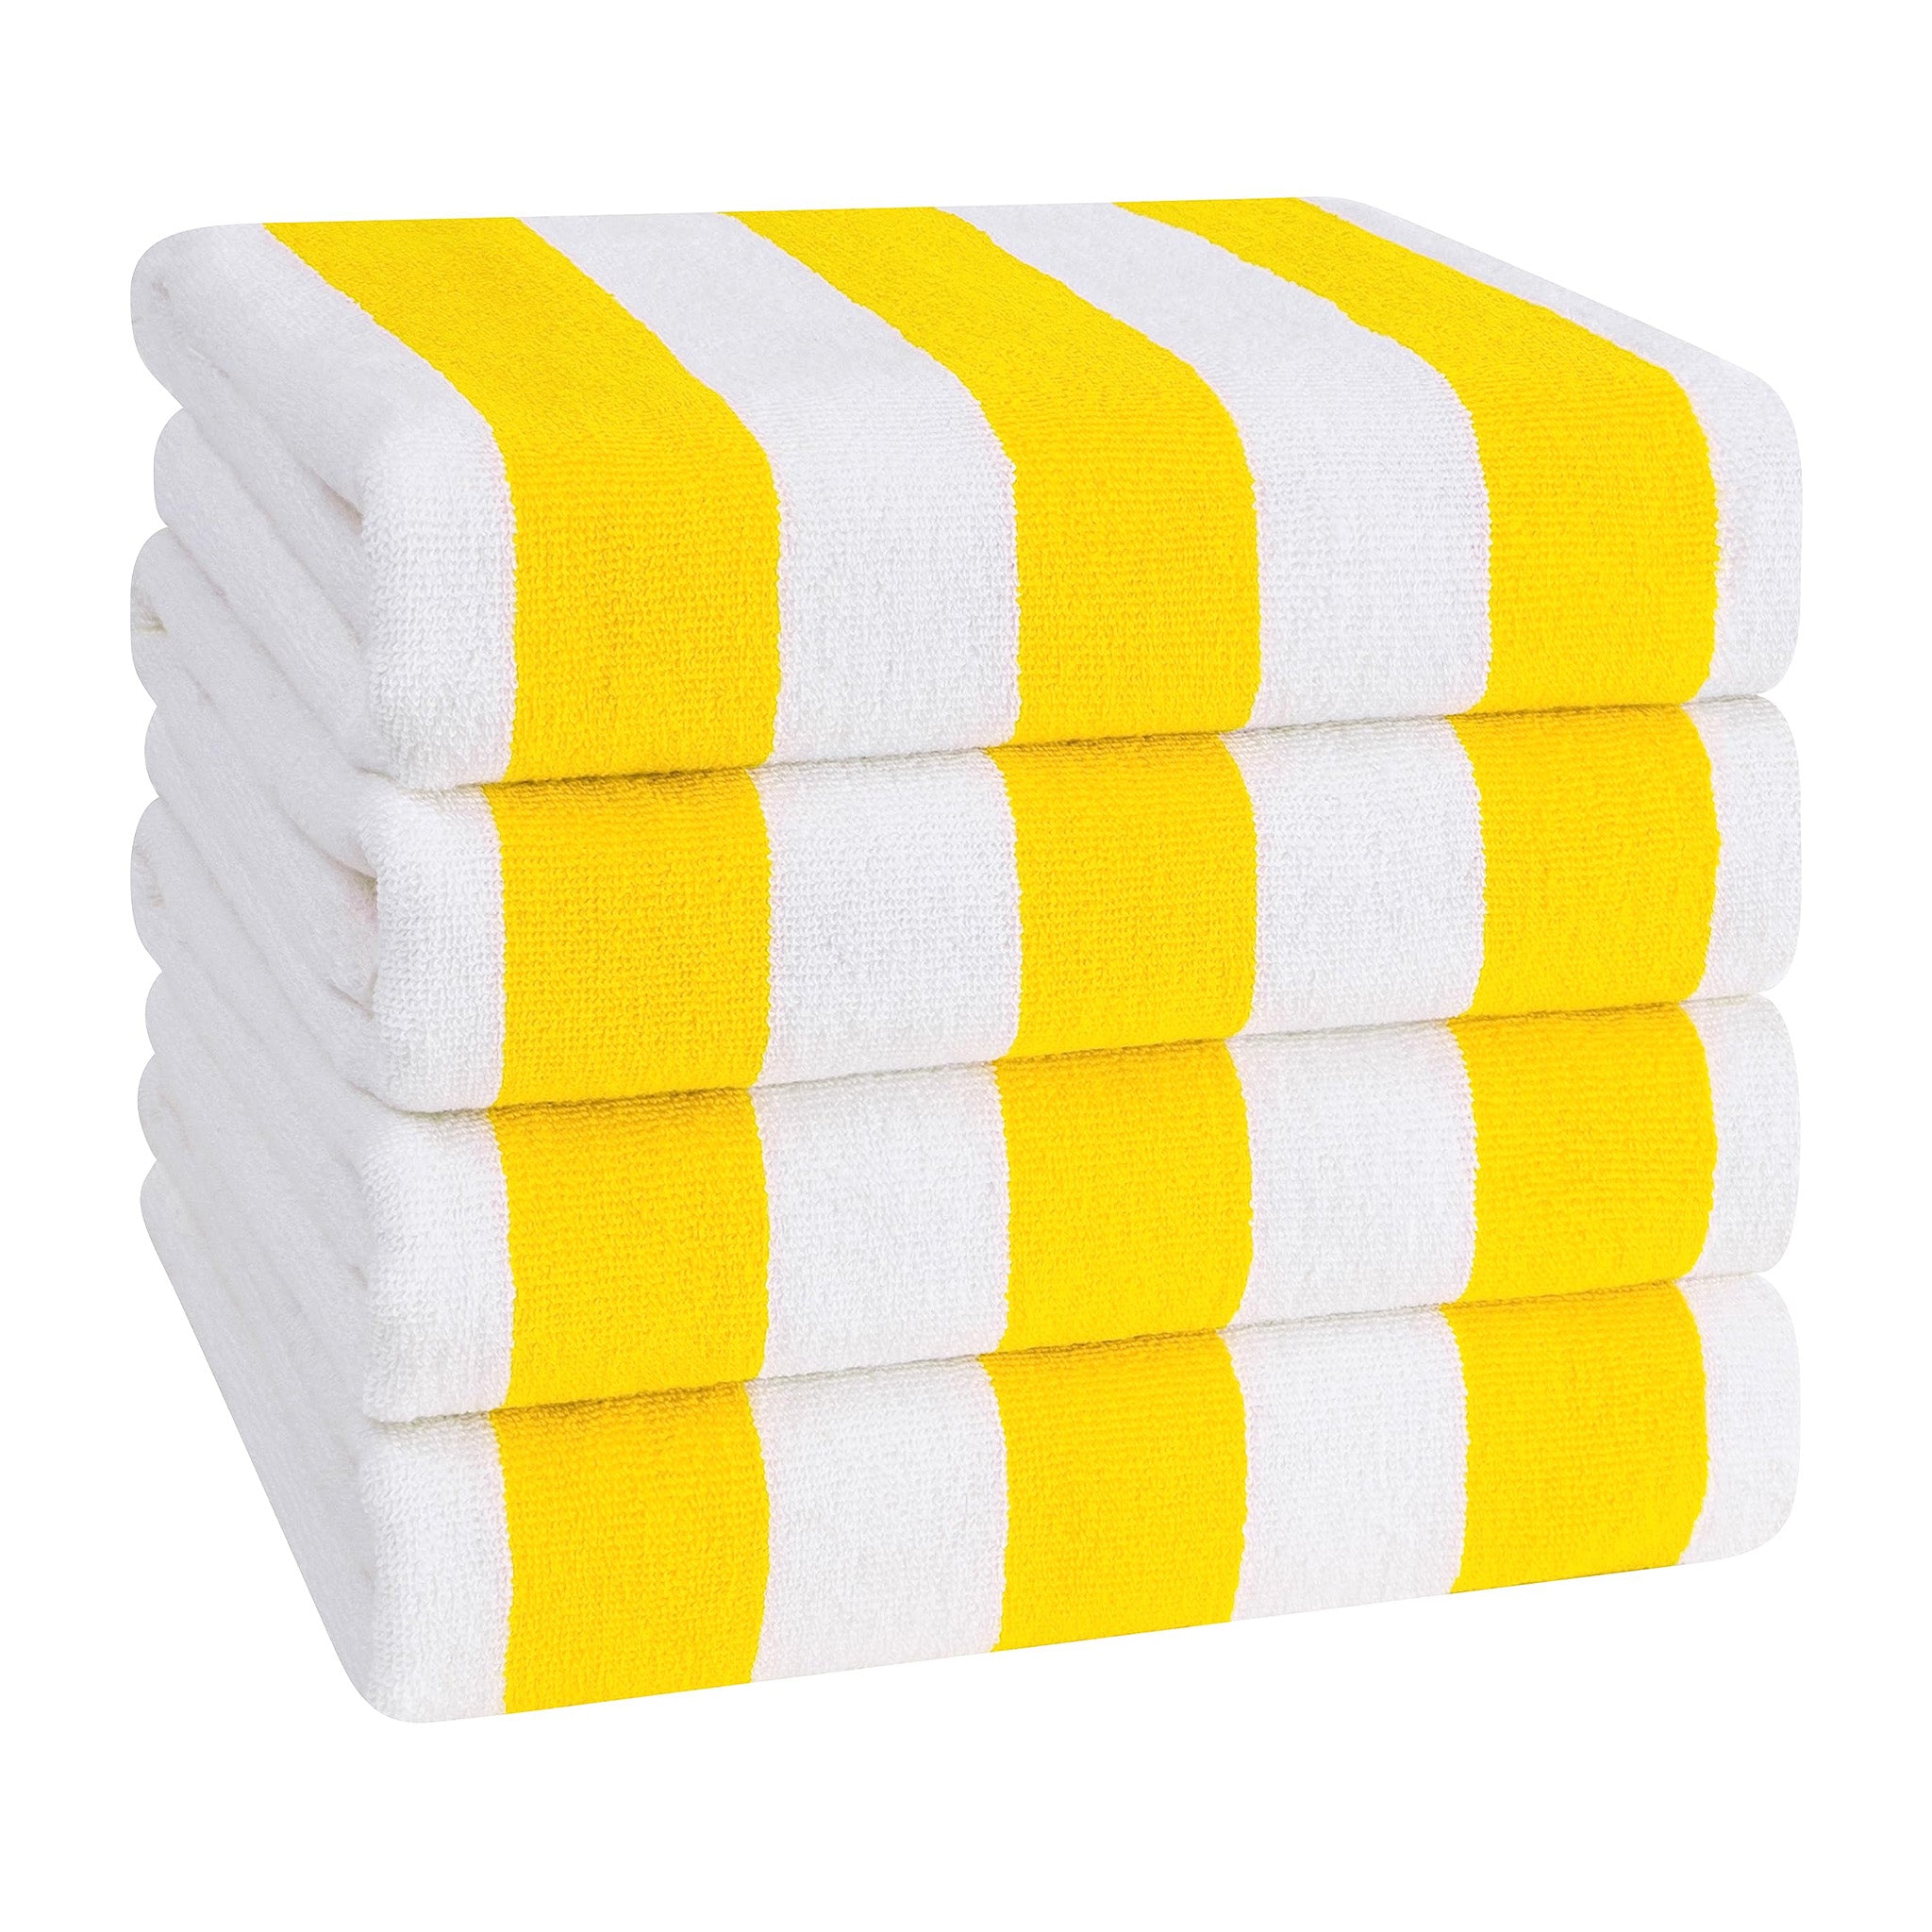 American Soft Linen 100% Cotton 4 Pack Beach Towels Cabana Striped Pool Towels -yellow-1